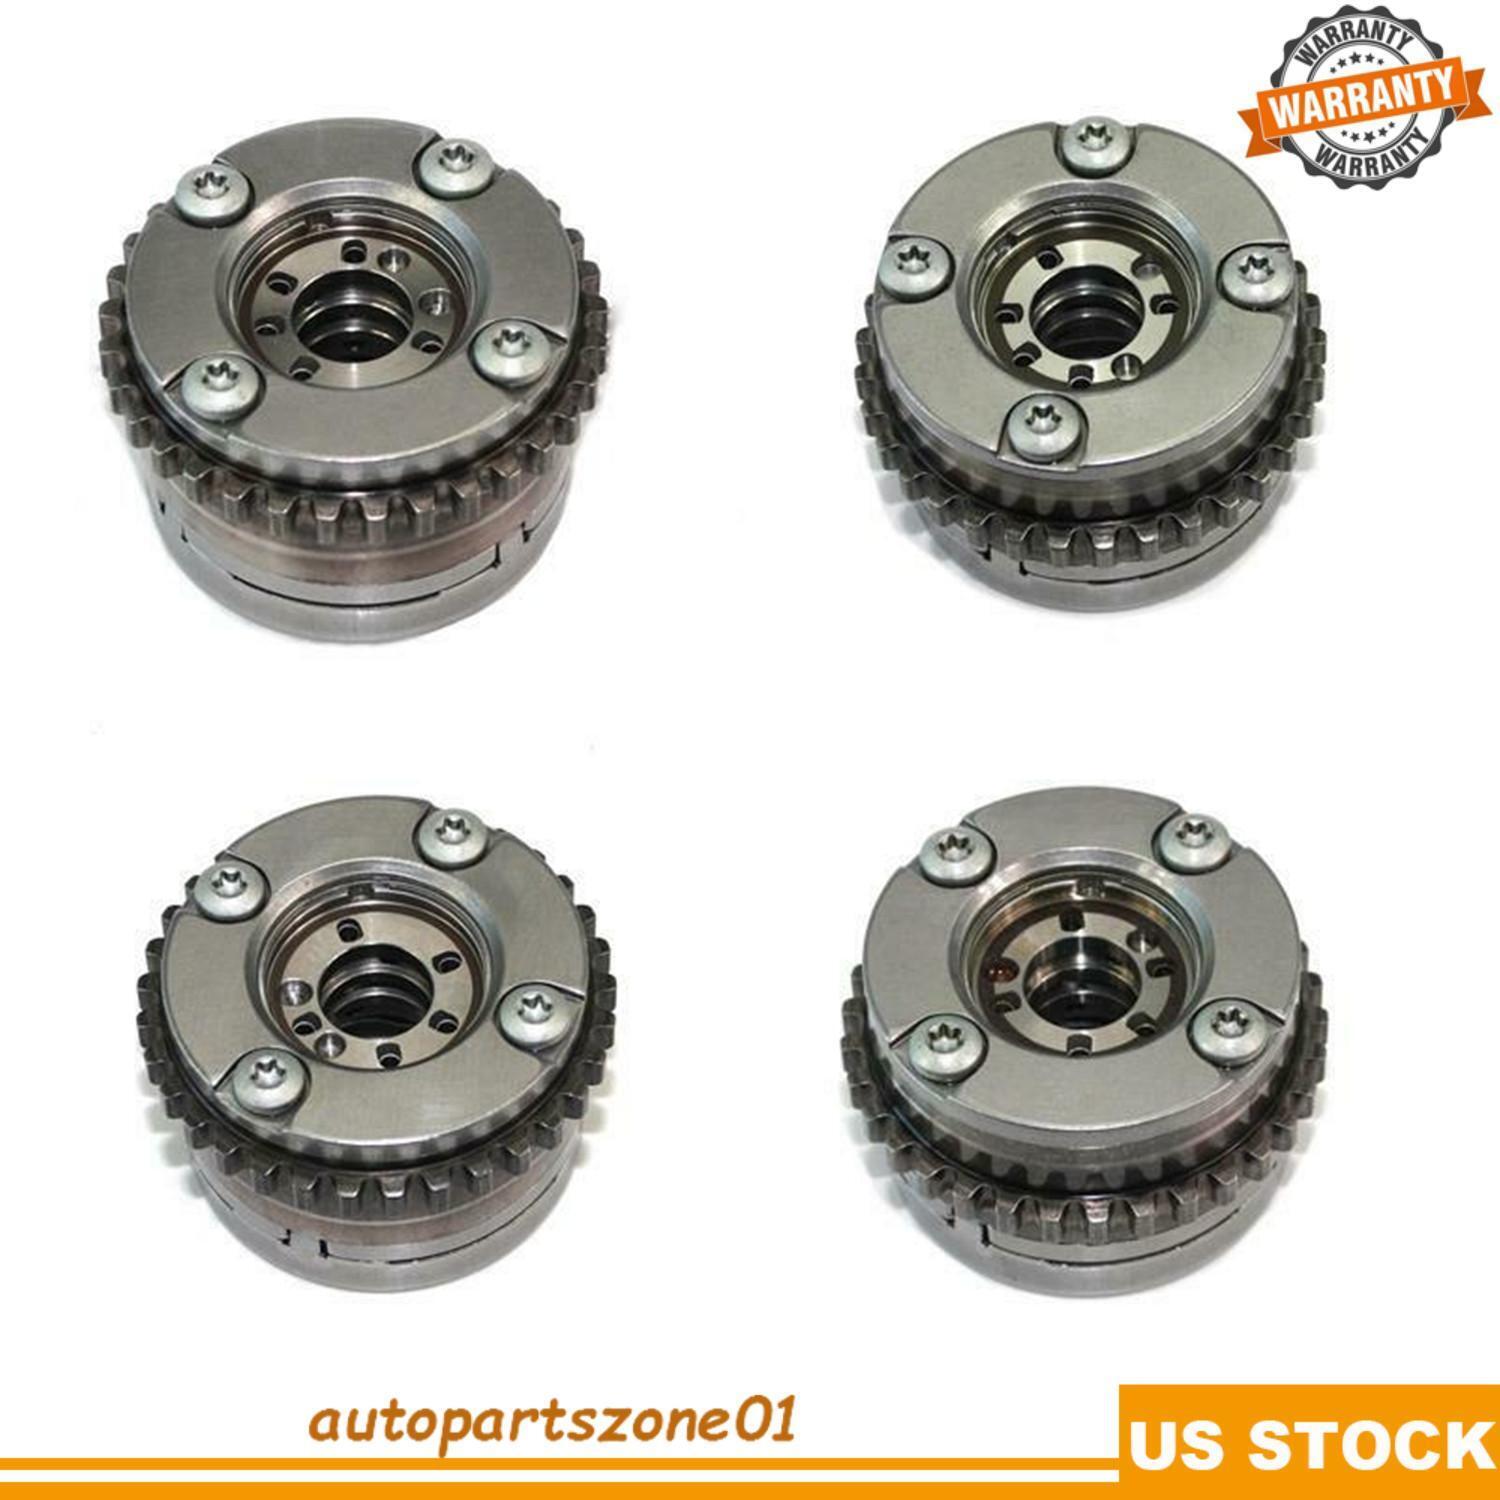 4Pcs Intake & Exhaust Camshaft Adjusters Set for Mercedes W222 W166 M276 C43 AMG